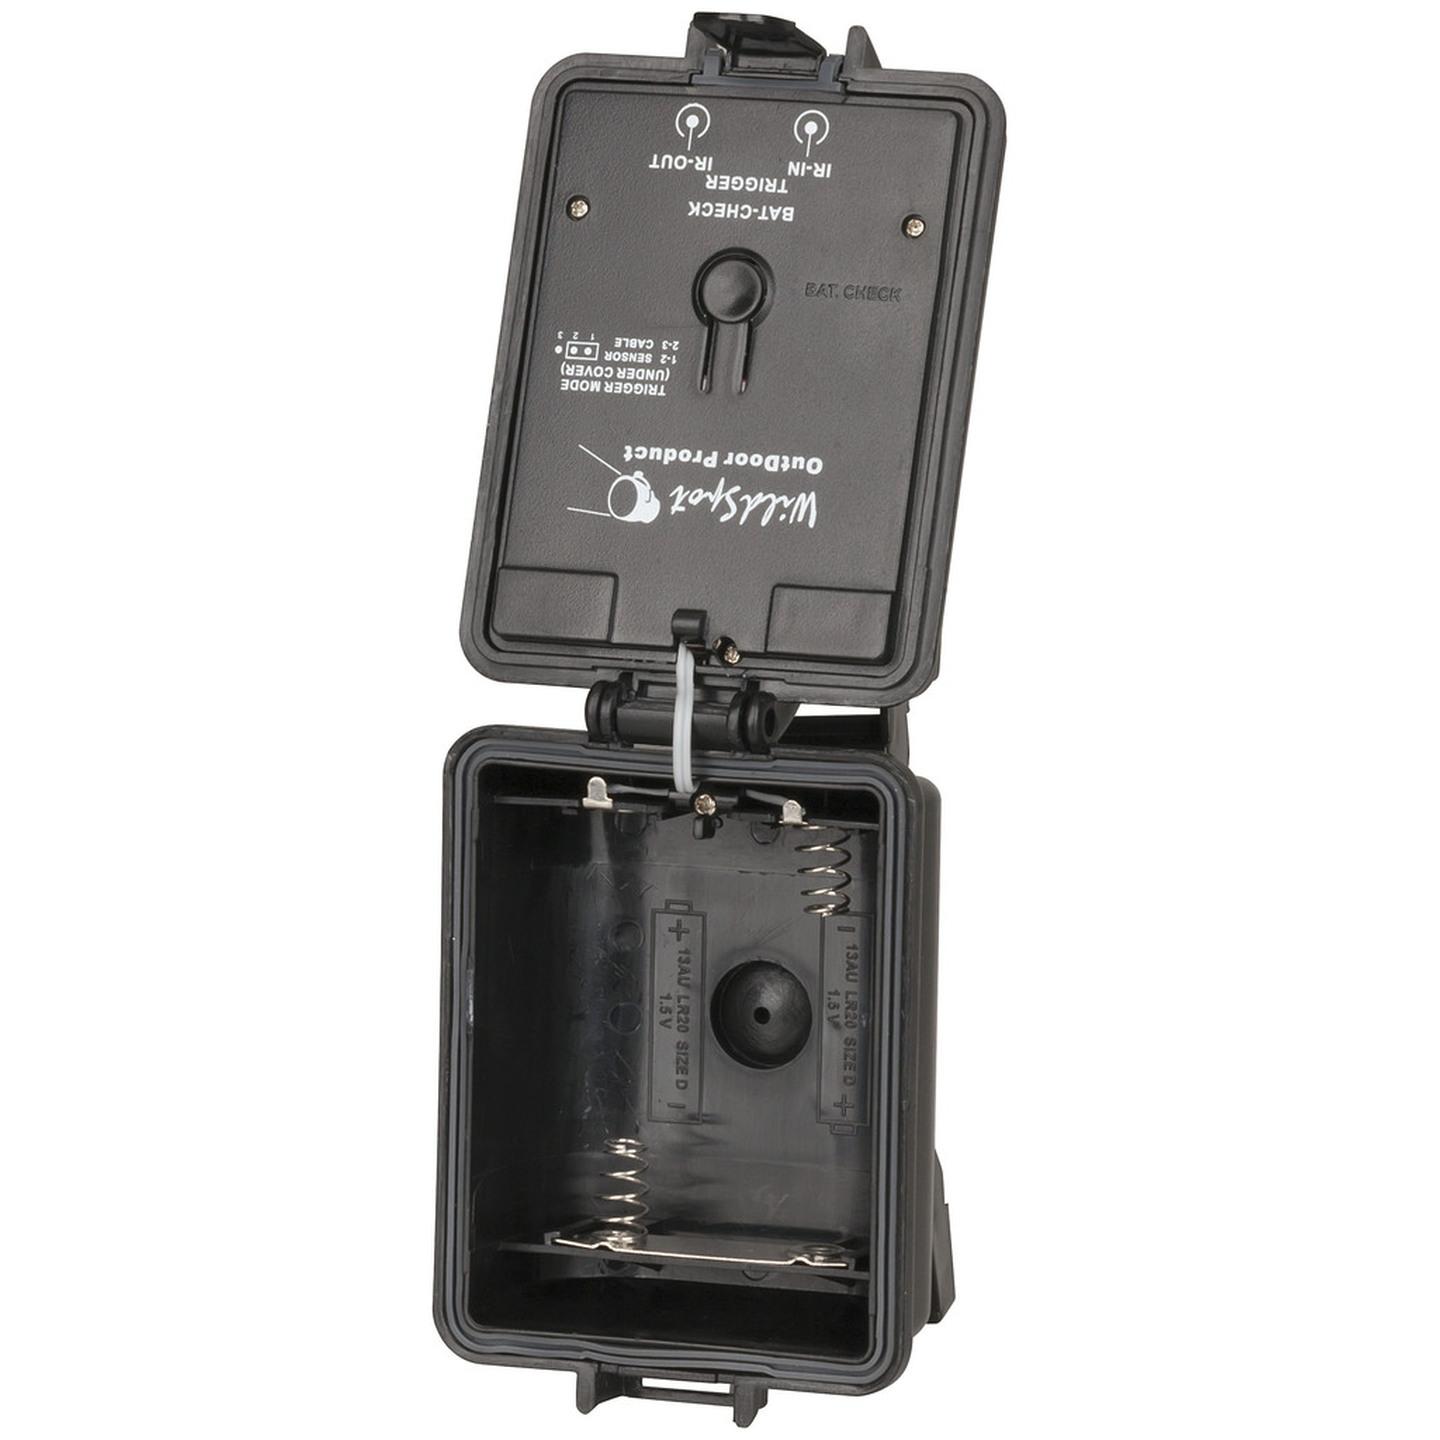 IR Wired Flash to suit Outdoor Camera QC8048